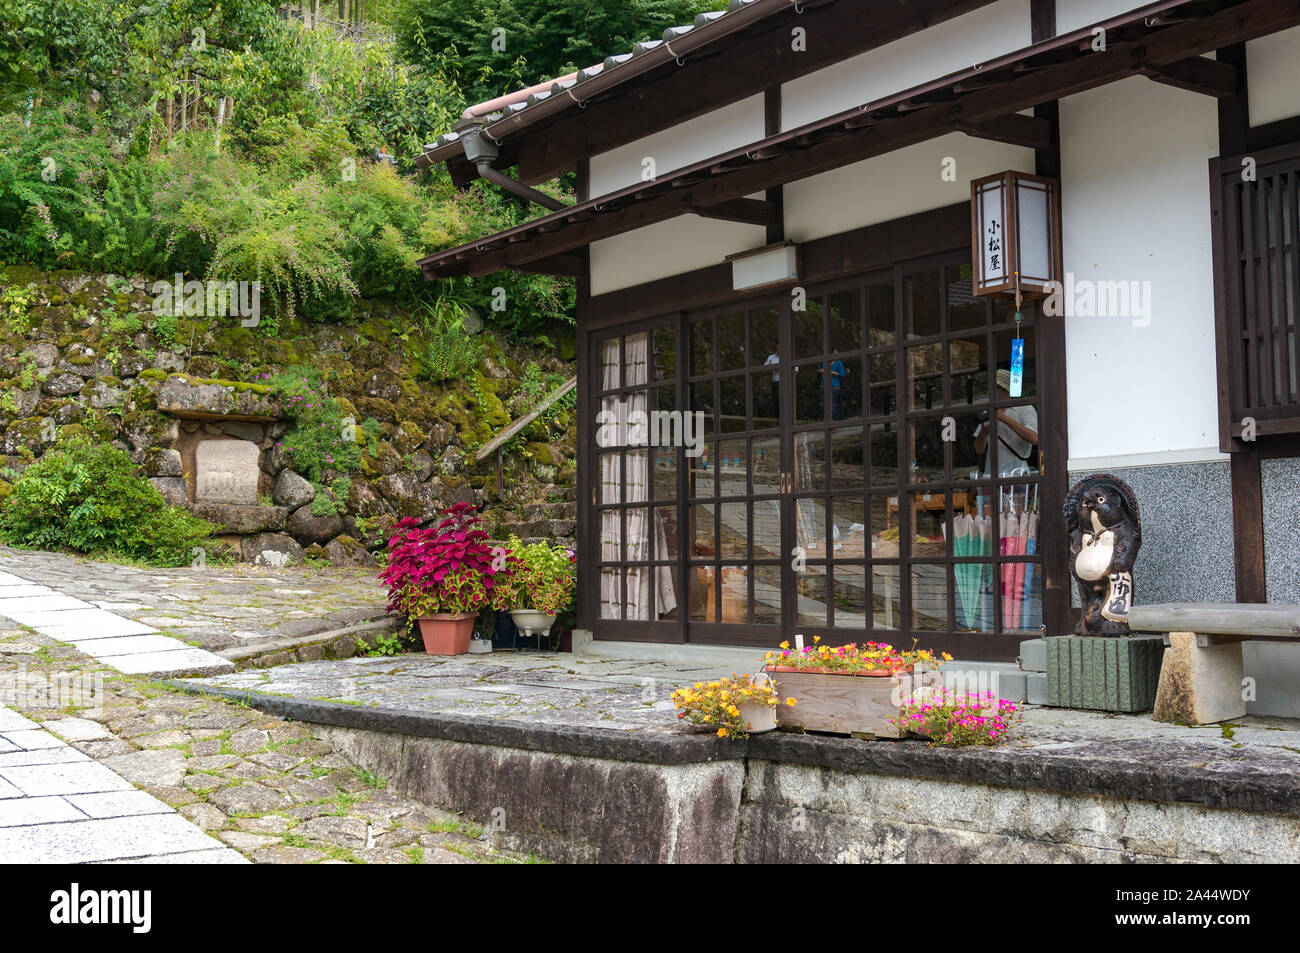 Magome, Japan - September 5, 2016: Shirakiya hotel in traditional Japanese architecture style with sliding doors and rice paper walls. Magome postal t Stock Photo